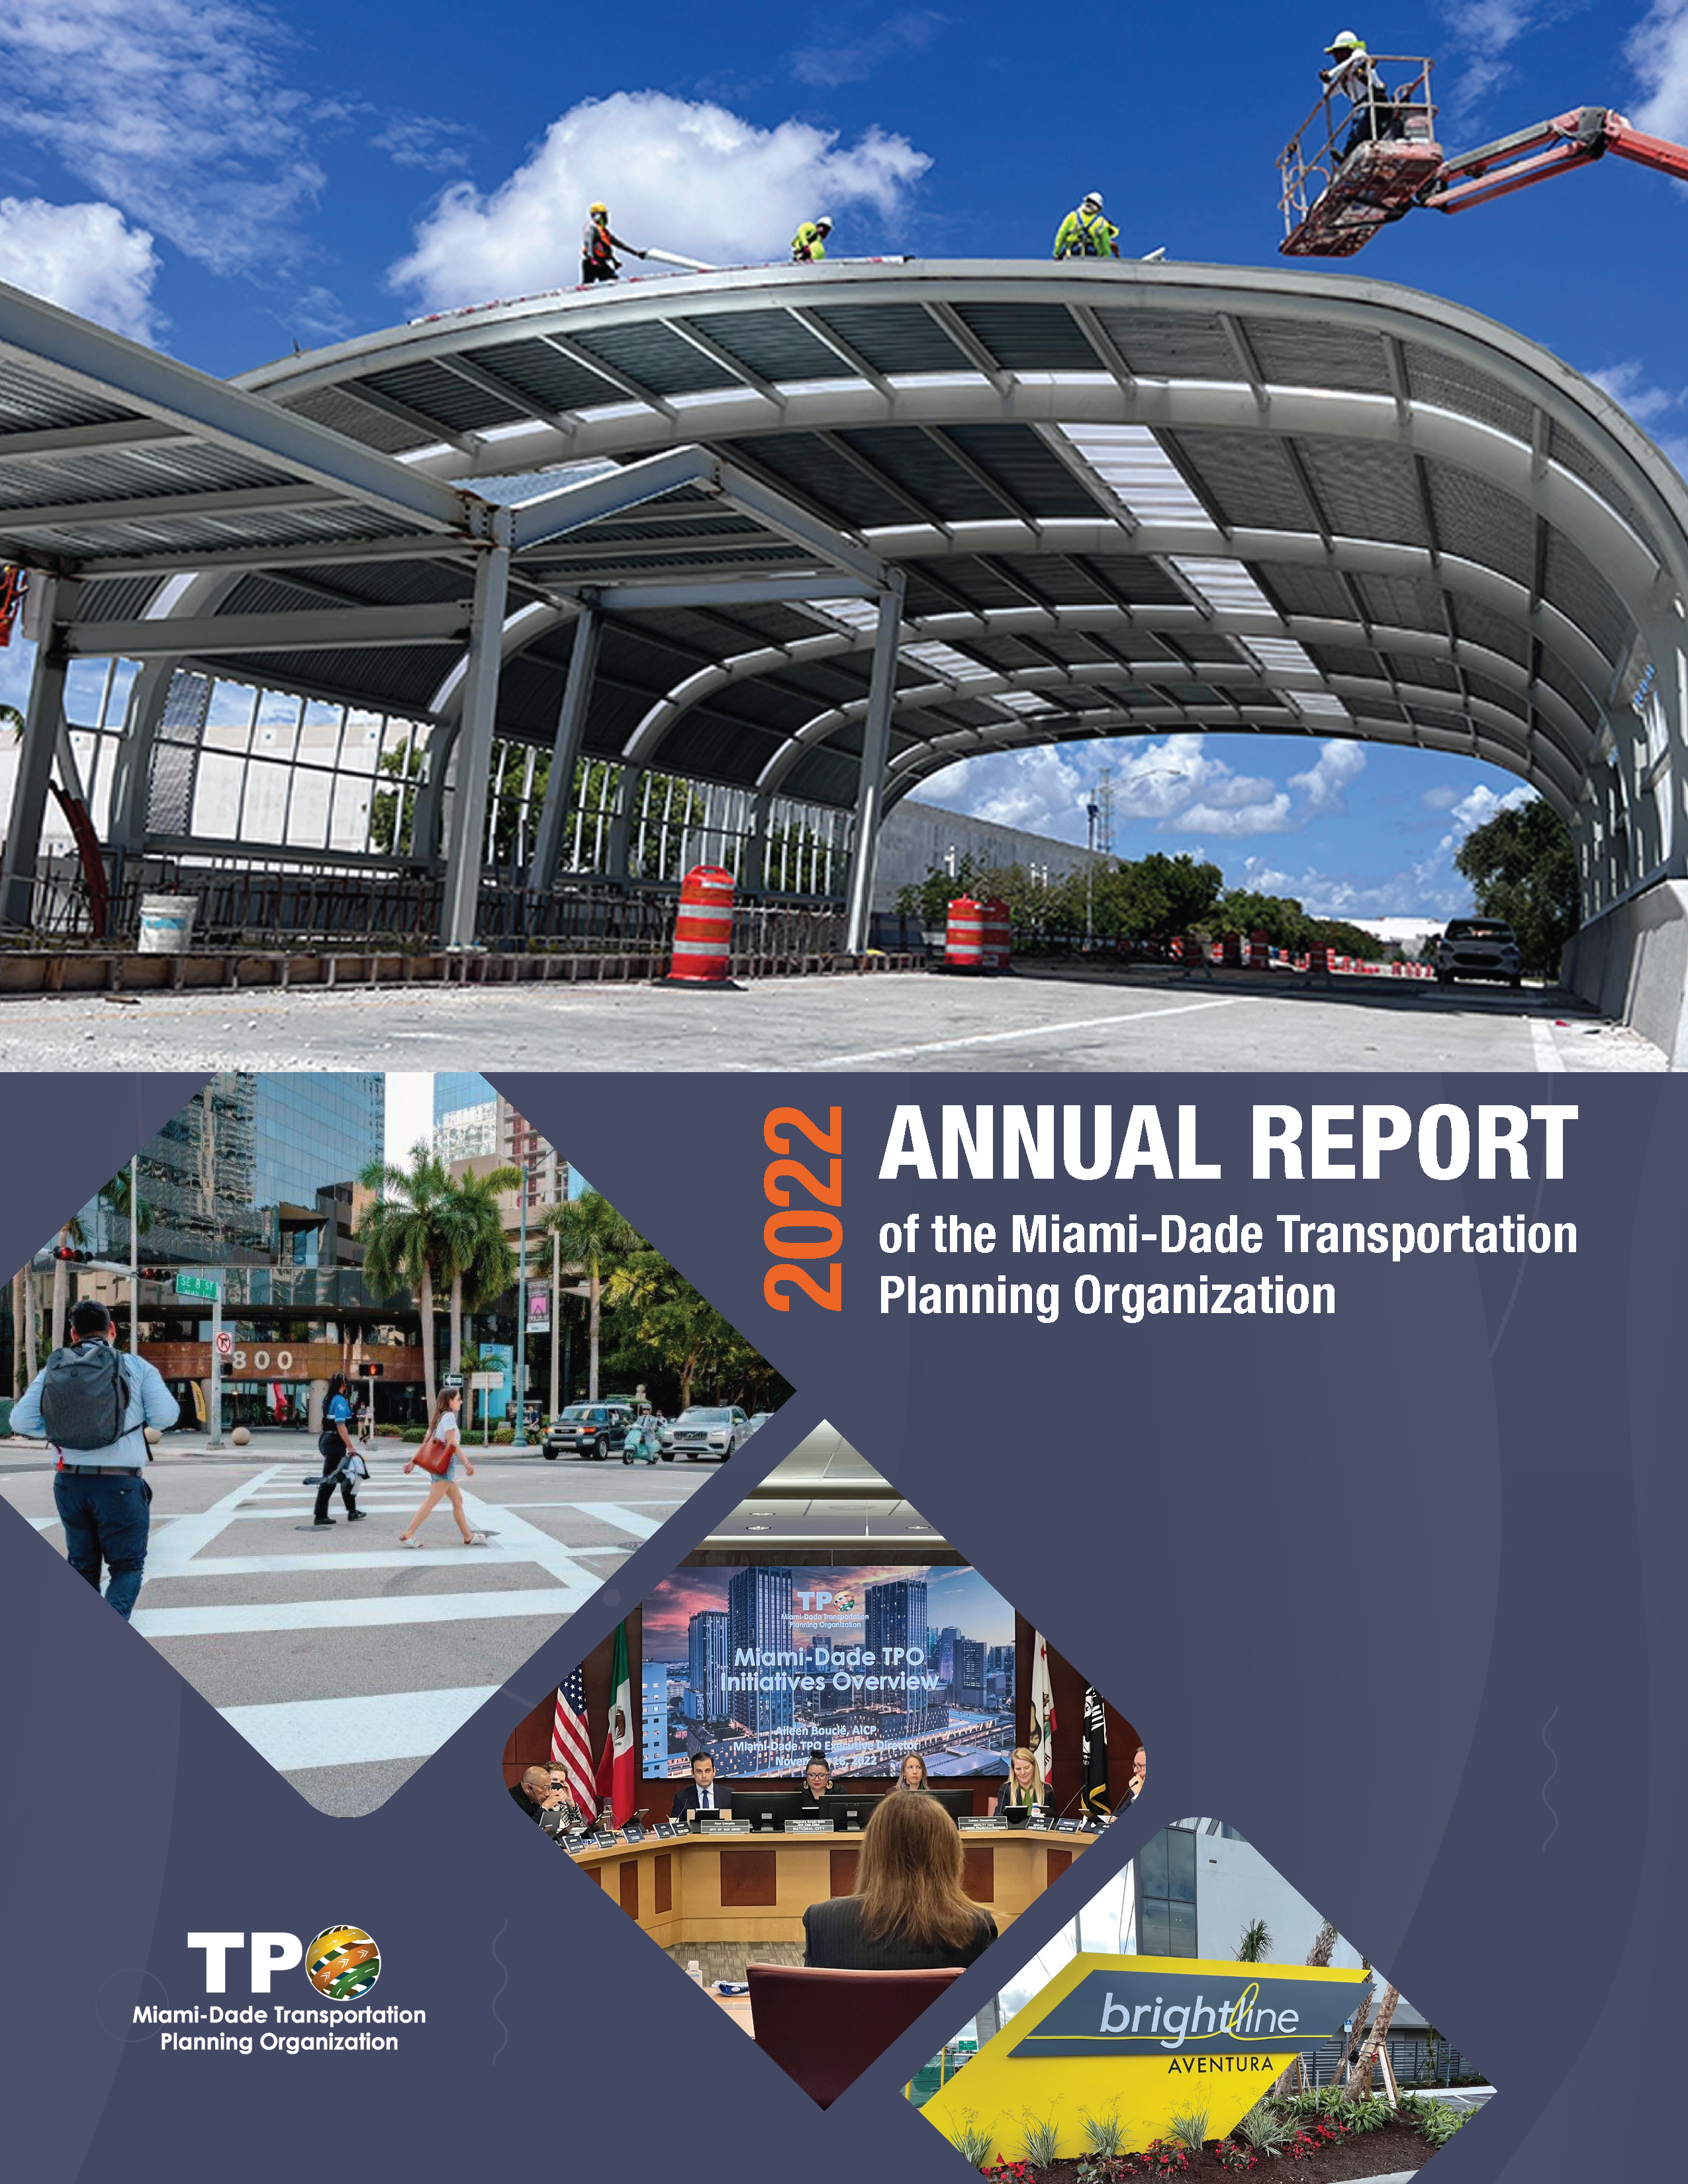 Cover for 2022 Annual Report